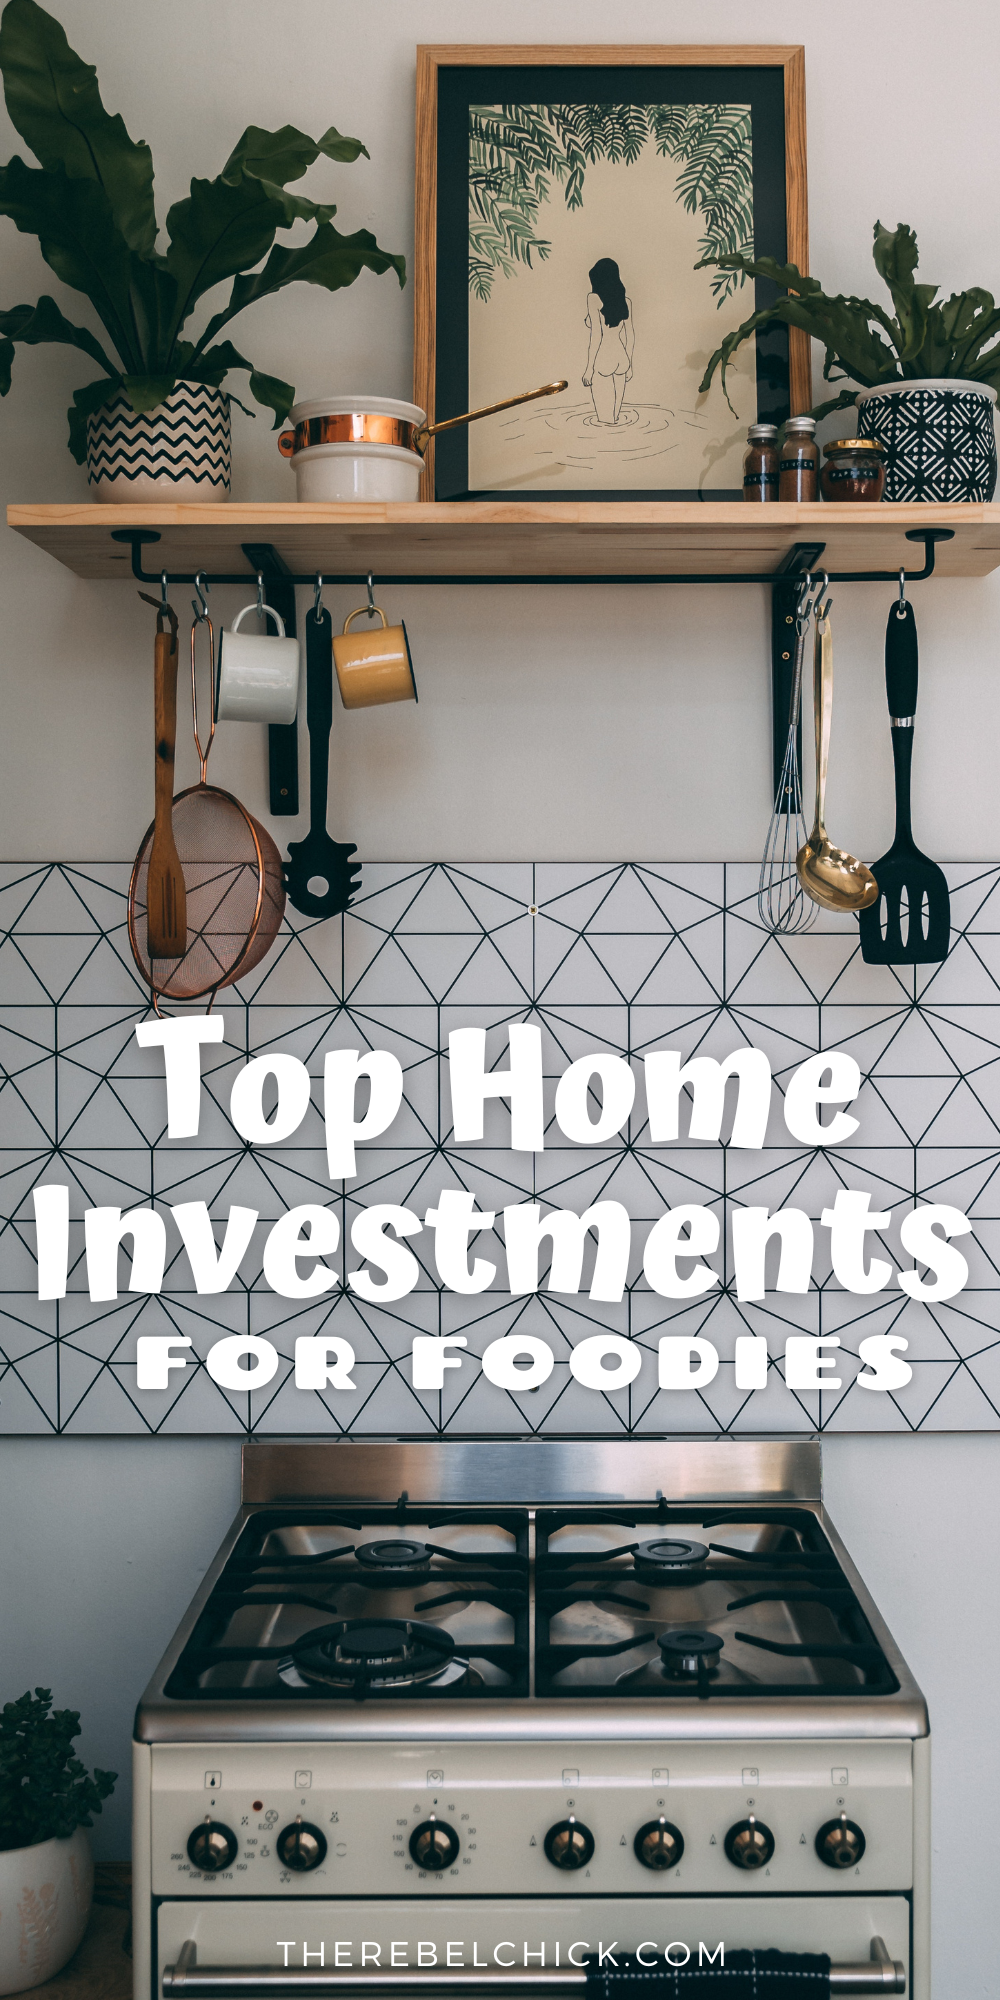 Top Home Investments for Foodies